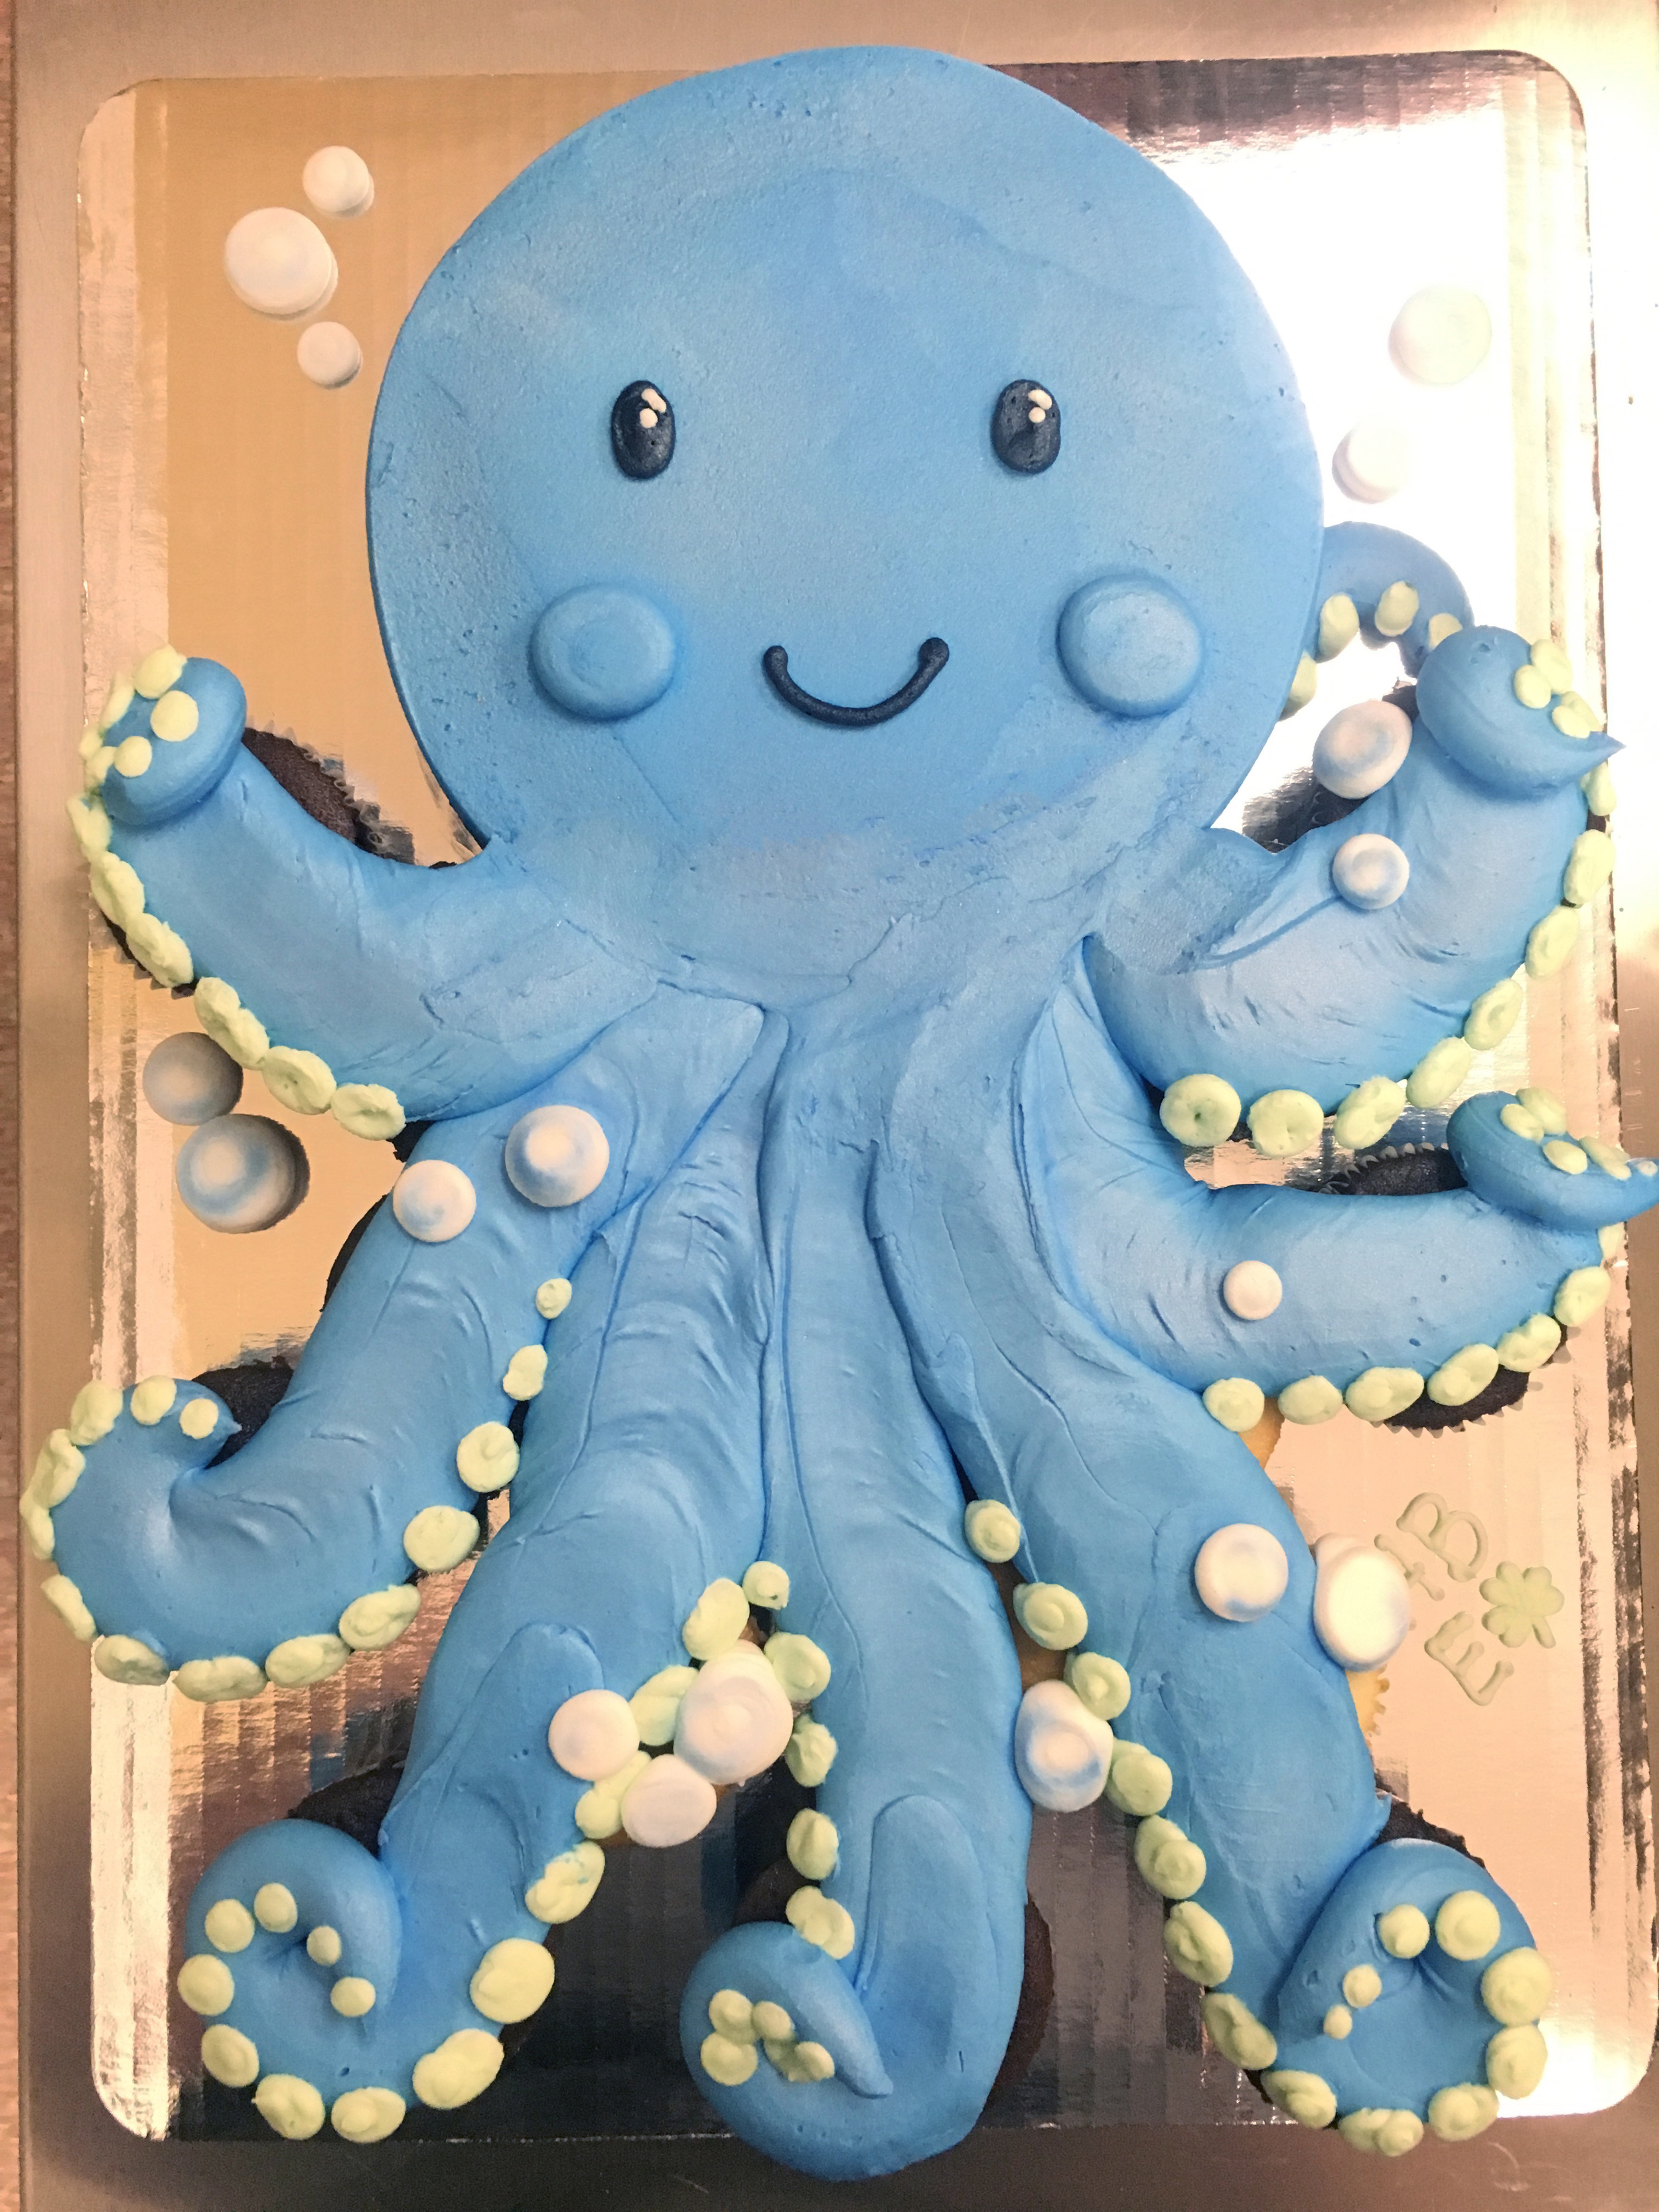 Octopus out of Cupcakes